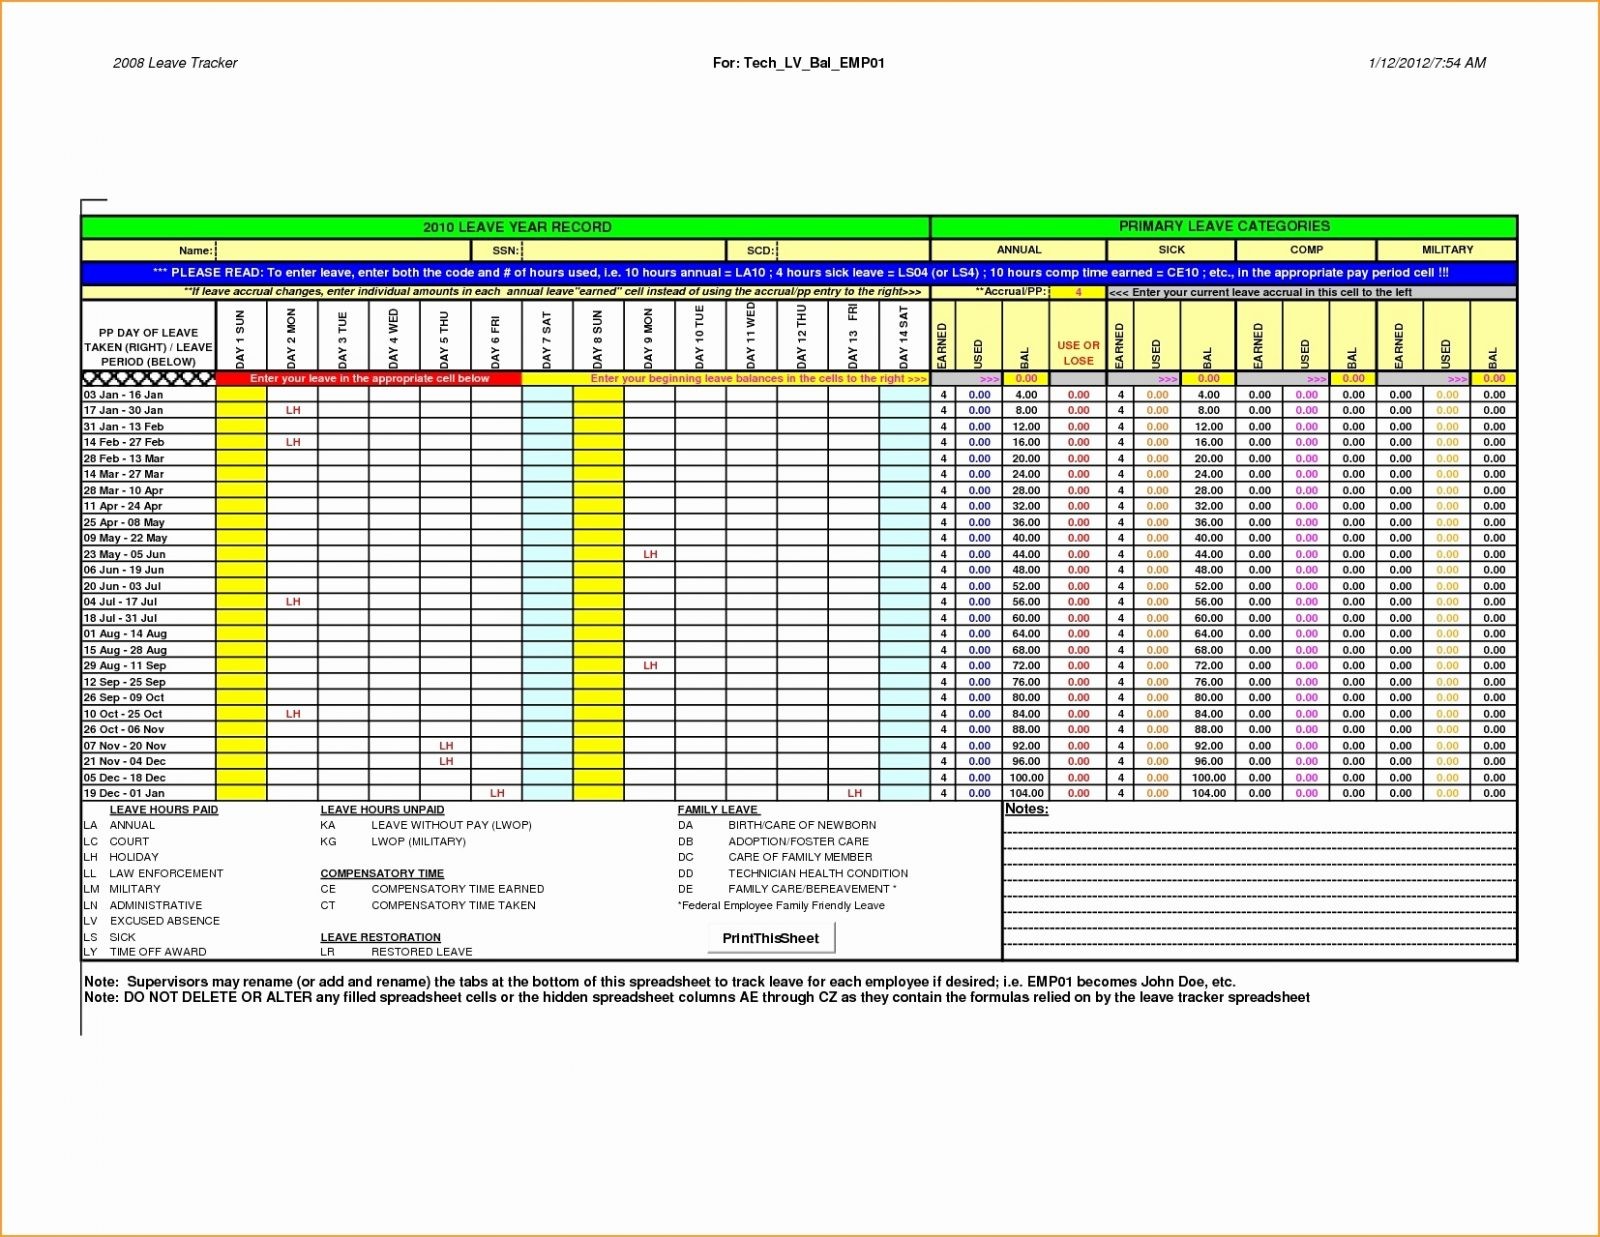 Grant Tracking Spreadsheet Excel On Templates Sample Document Template